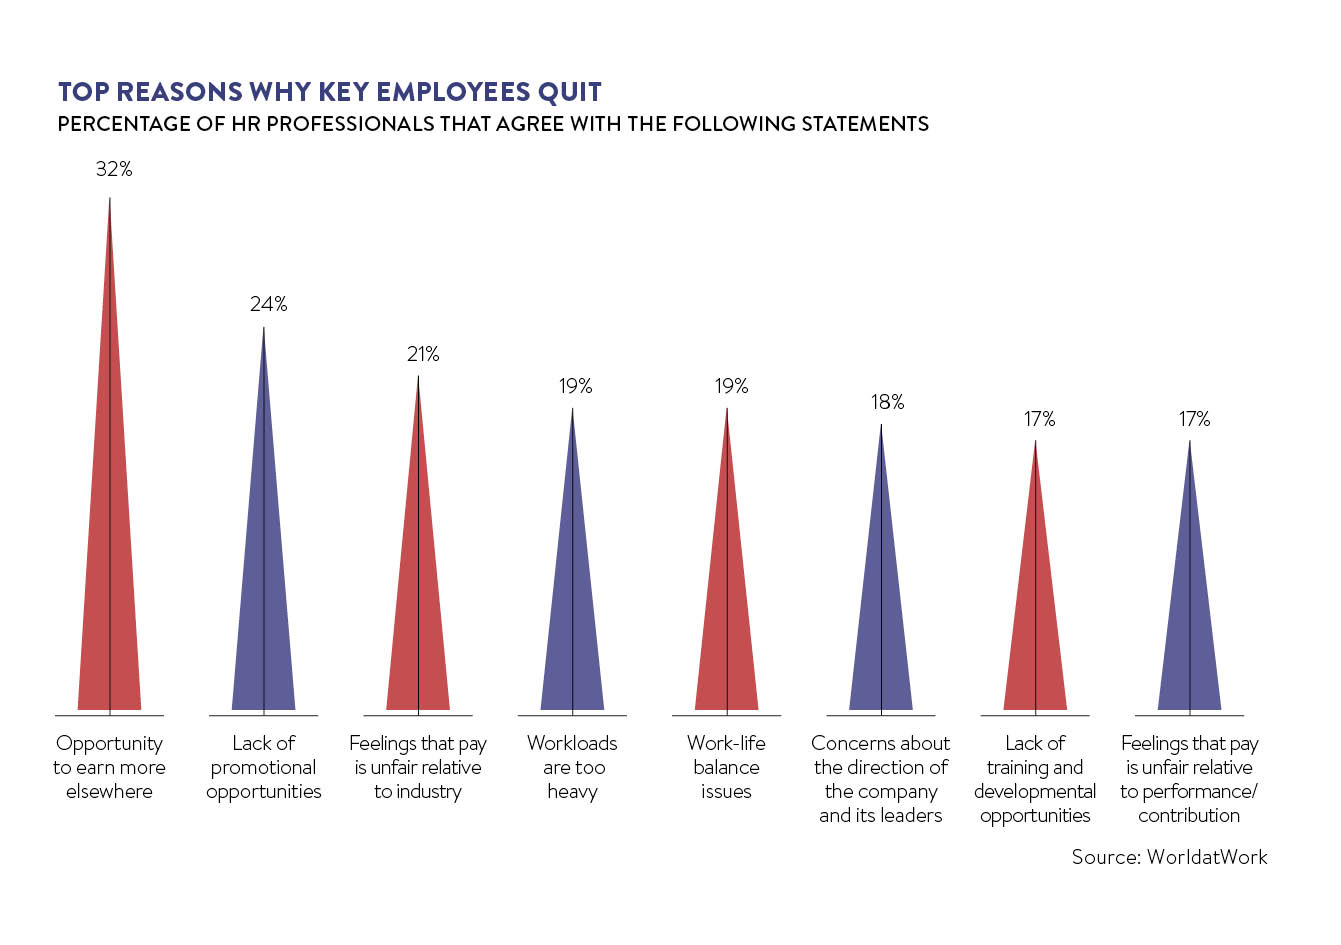 Top reasons why key employees quit